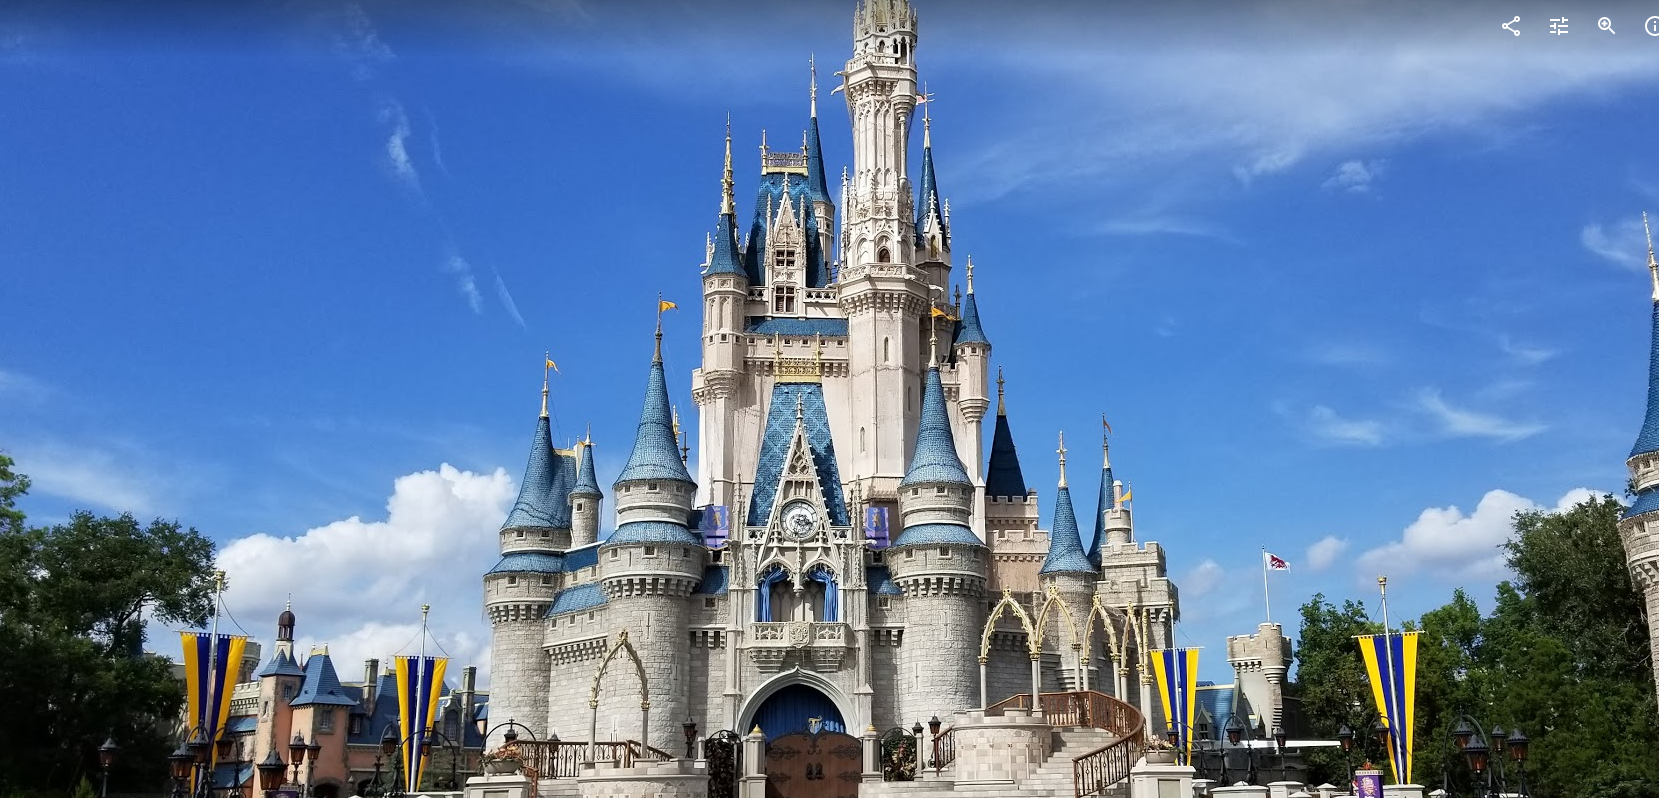 It’s official 2020 Disney World Ticket and Hotel Bookings go on sale Tomorrow